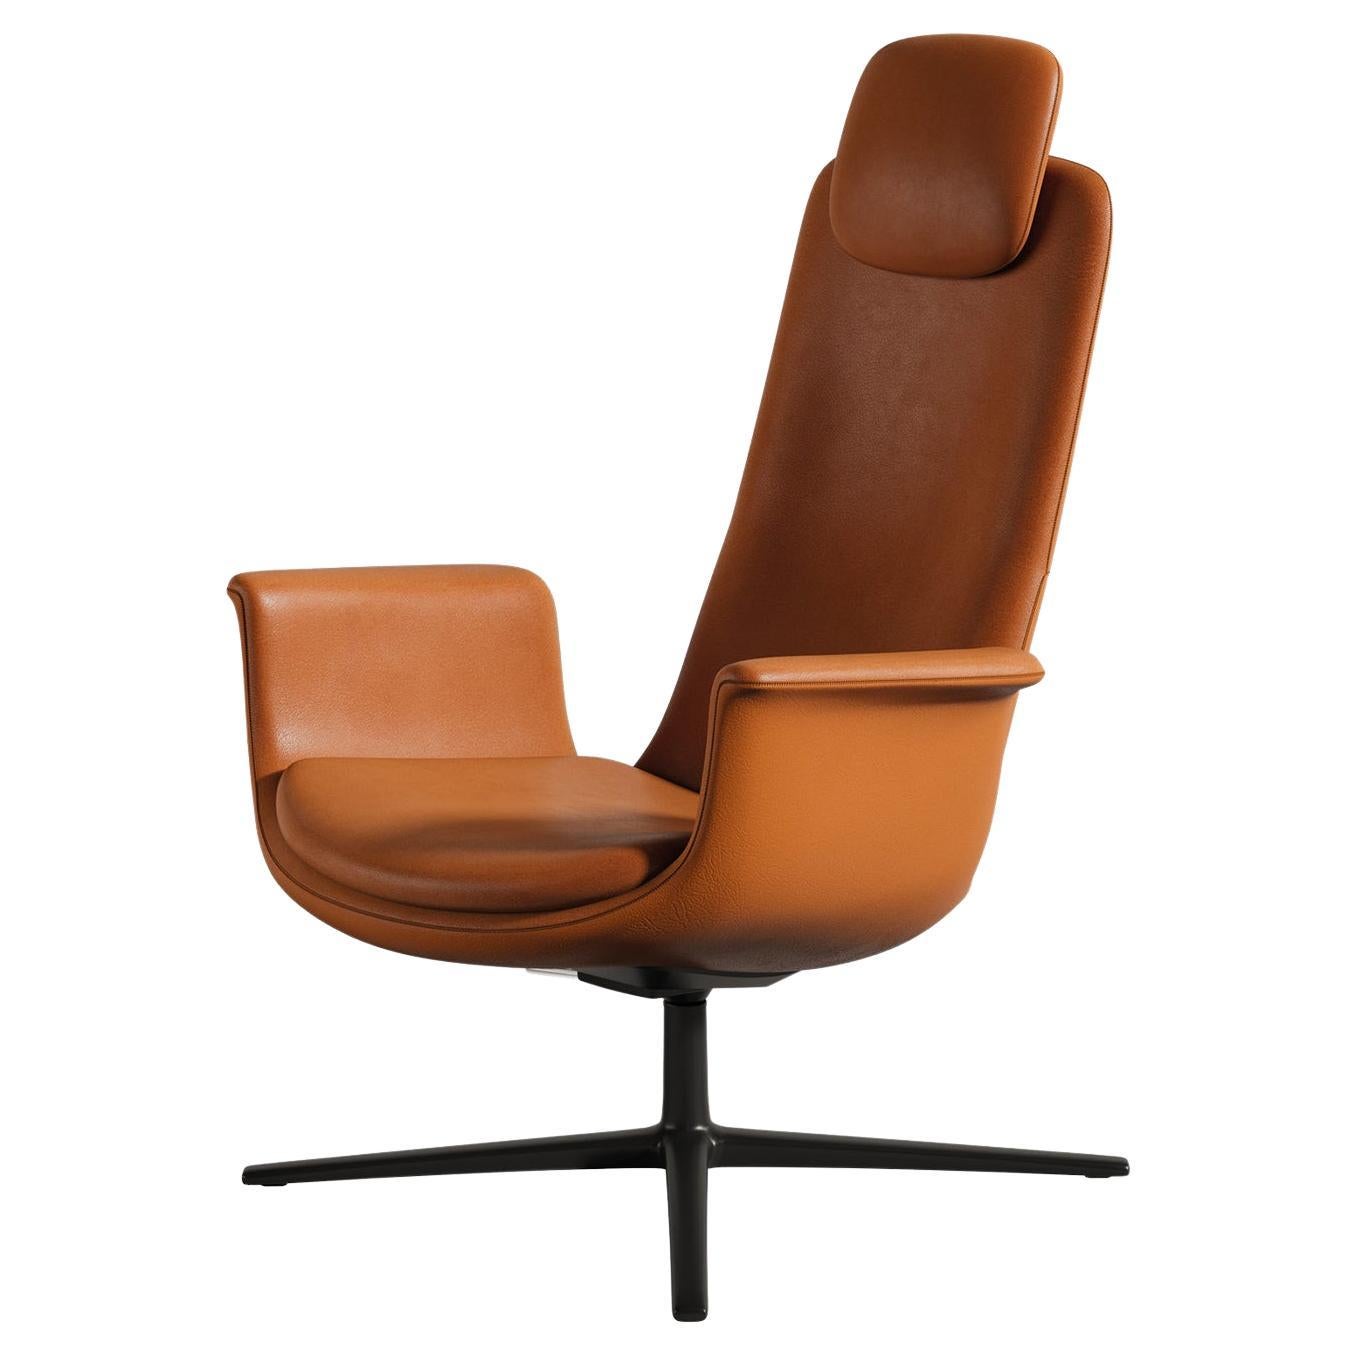 Contemporay Armchair, Office Chair, Club chair "Odyssey" brown leather  For Sale